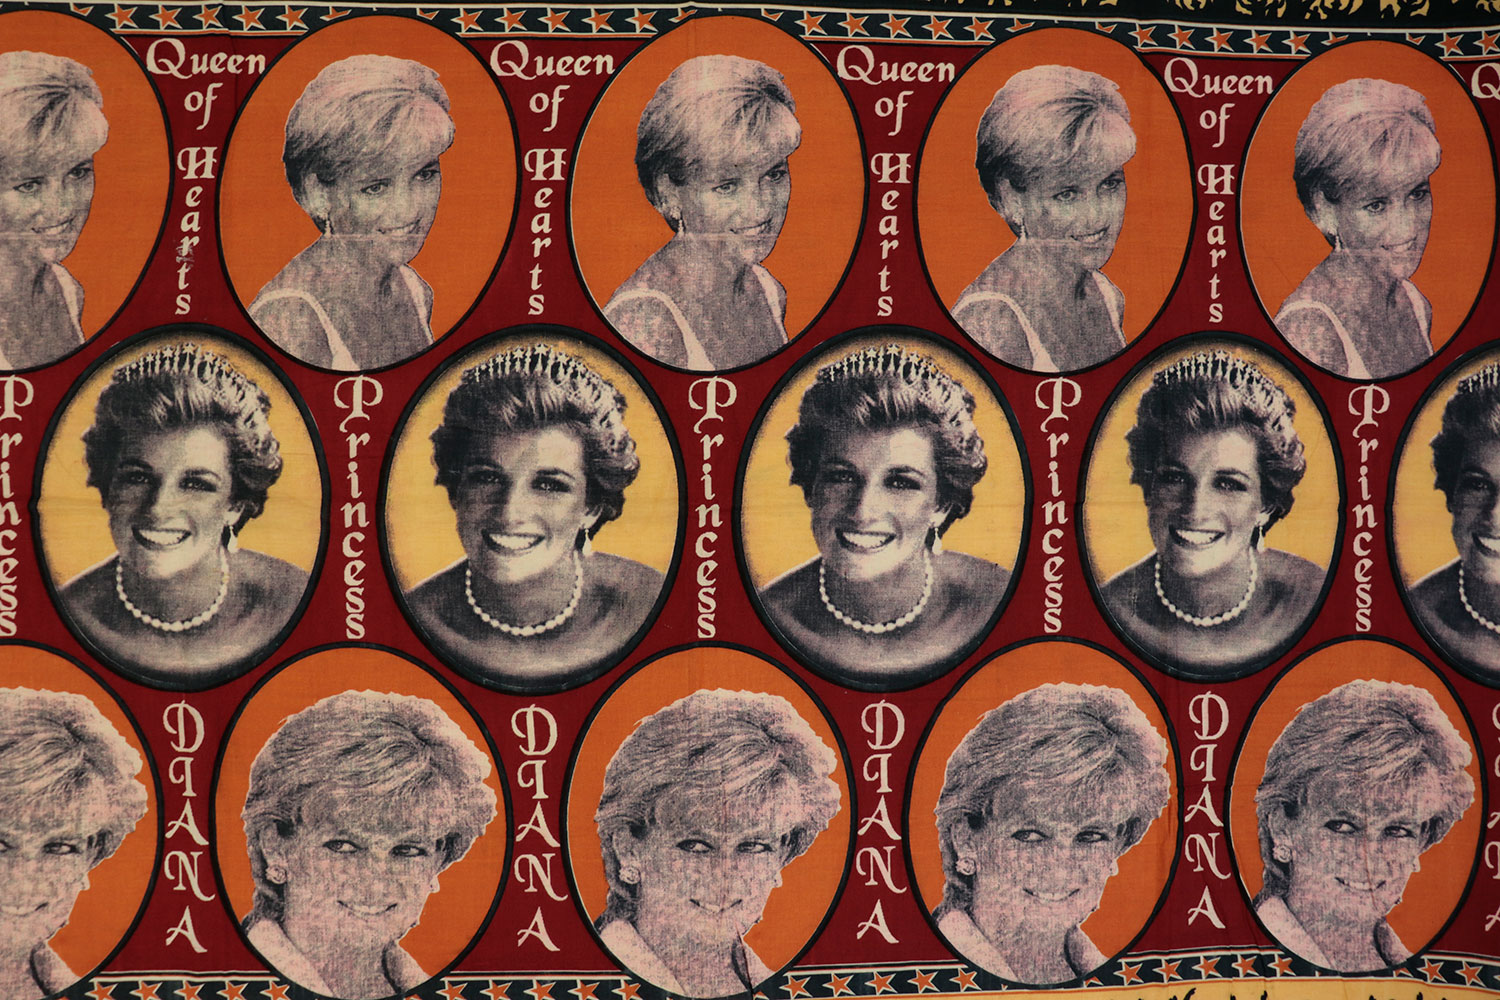 Capulana featuring a repeating pattern of photographic portraits of Princess Diana and the legends 'Queen of Hearts'; 'Princess' and 'Diana': Africa, Southern Africa, Mozambique, 1994-2000.